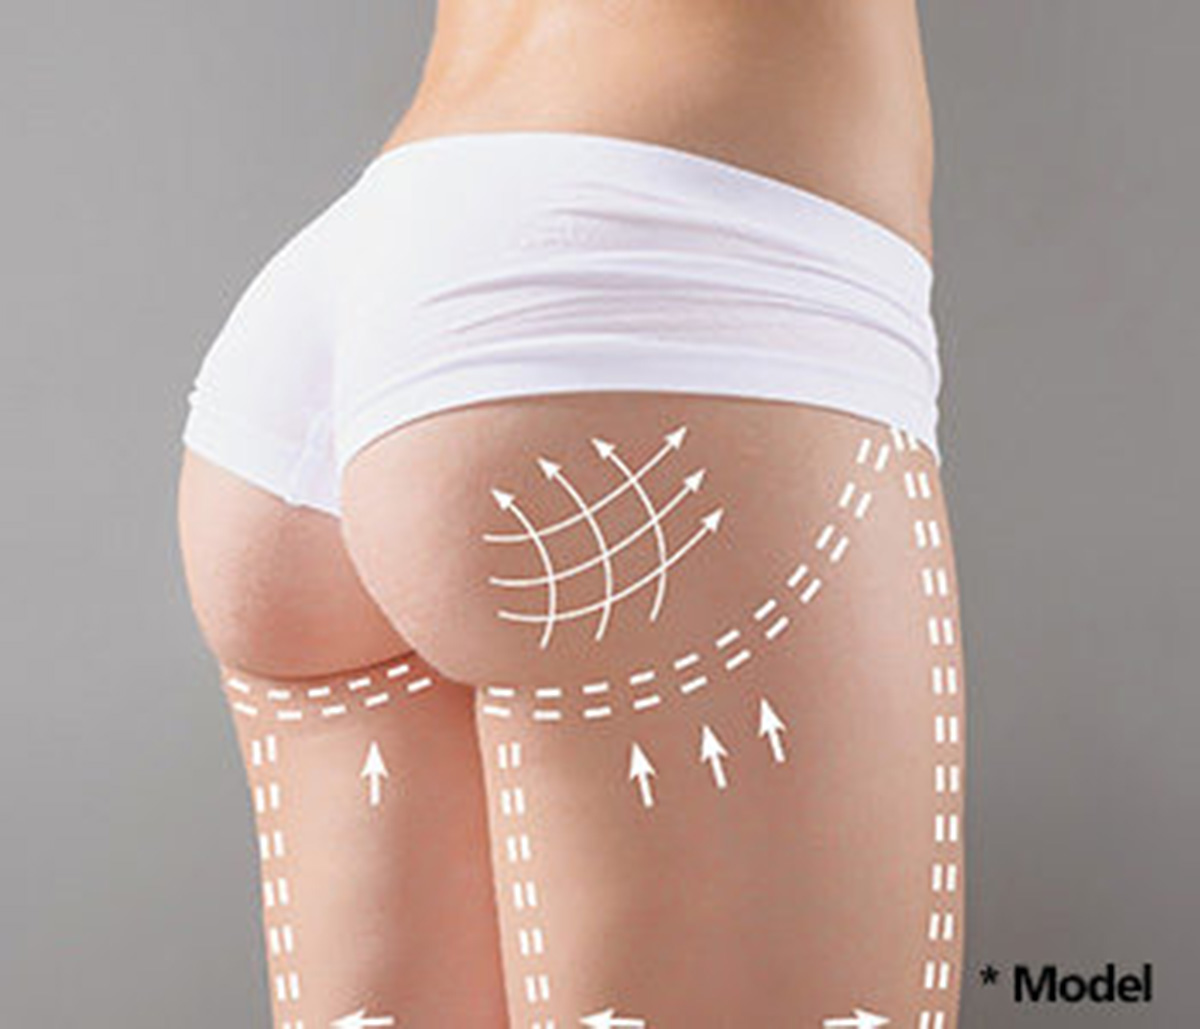 Butt Augmentation Los Angeles - Butt Implants - Gluteal Implant